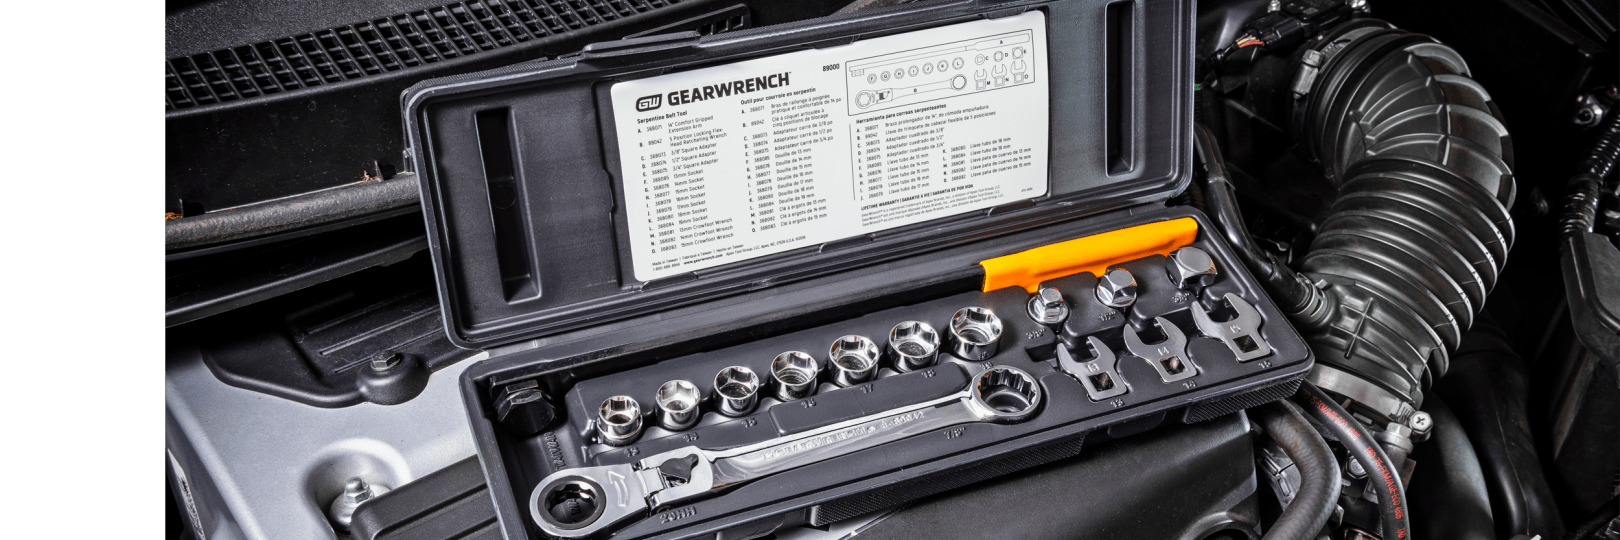 GEARWRENCH 89000 Serpentine Belt Tool Set in Automotive environment